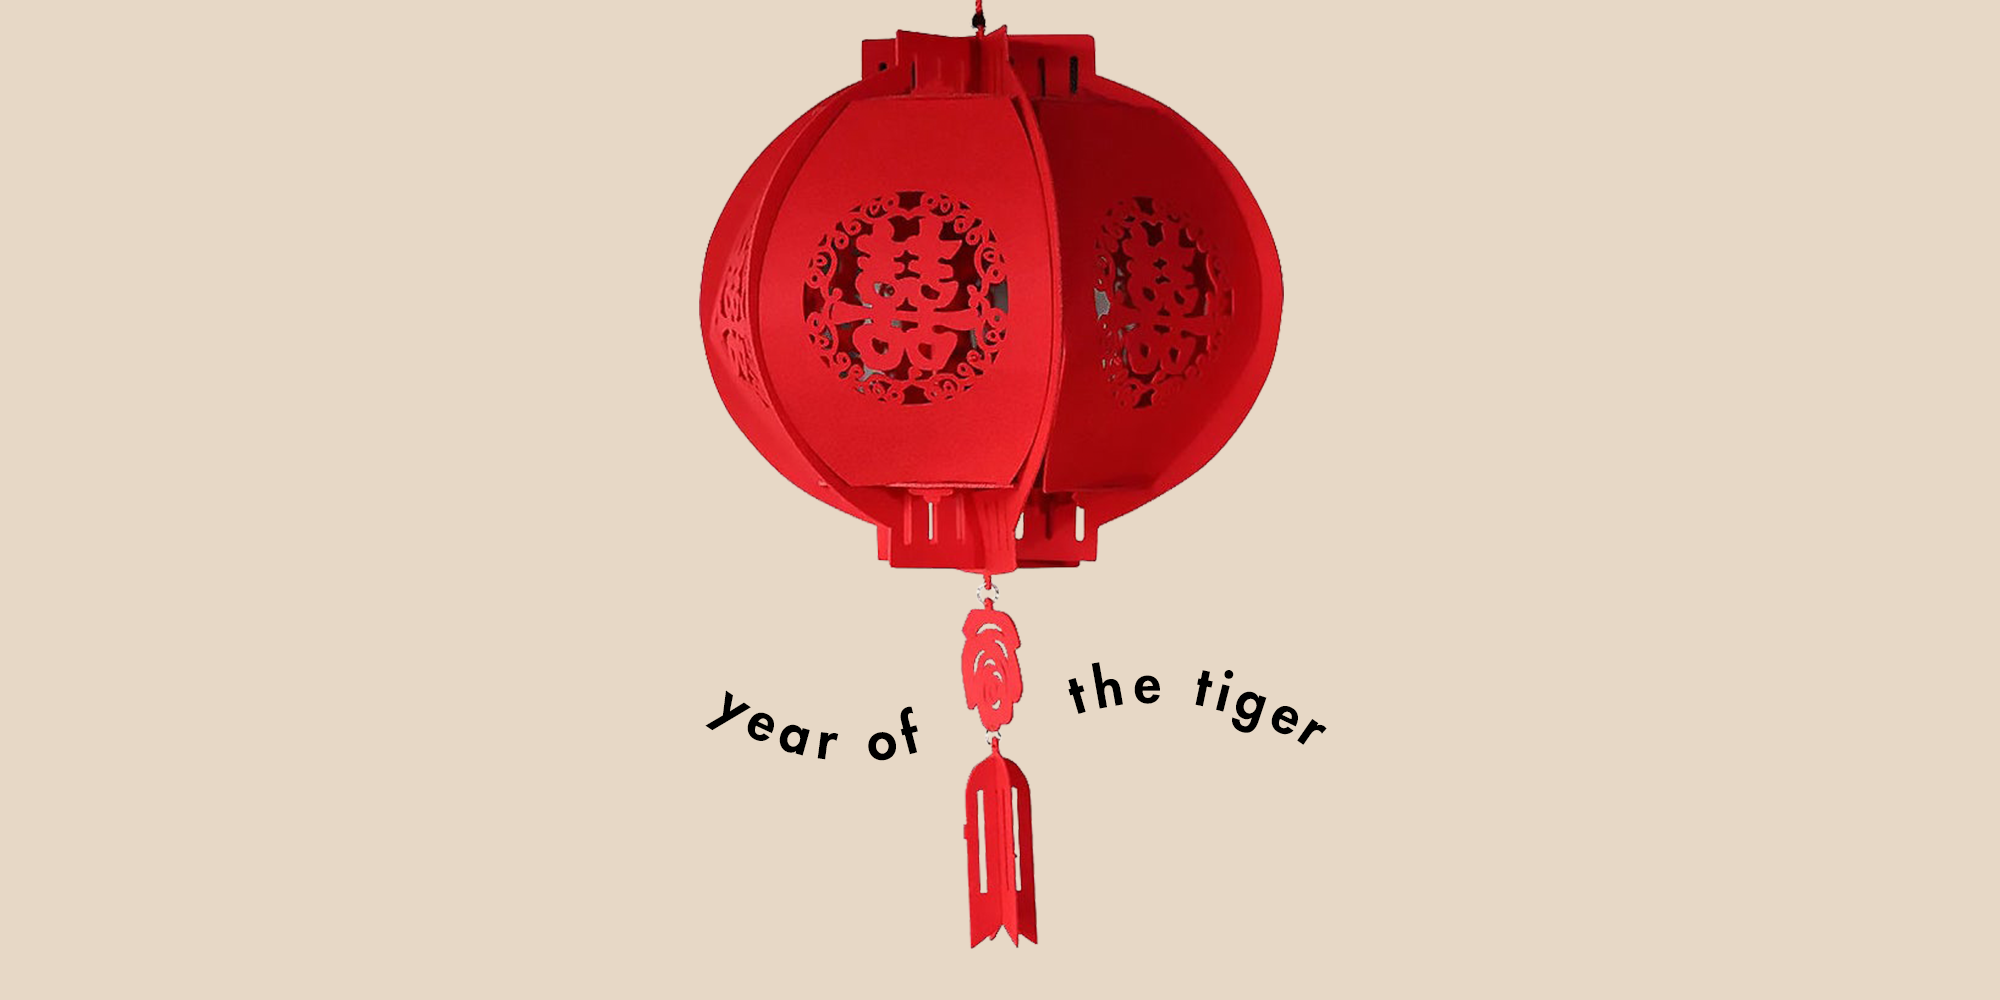 chinese new year decorations 2022